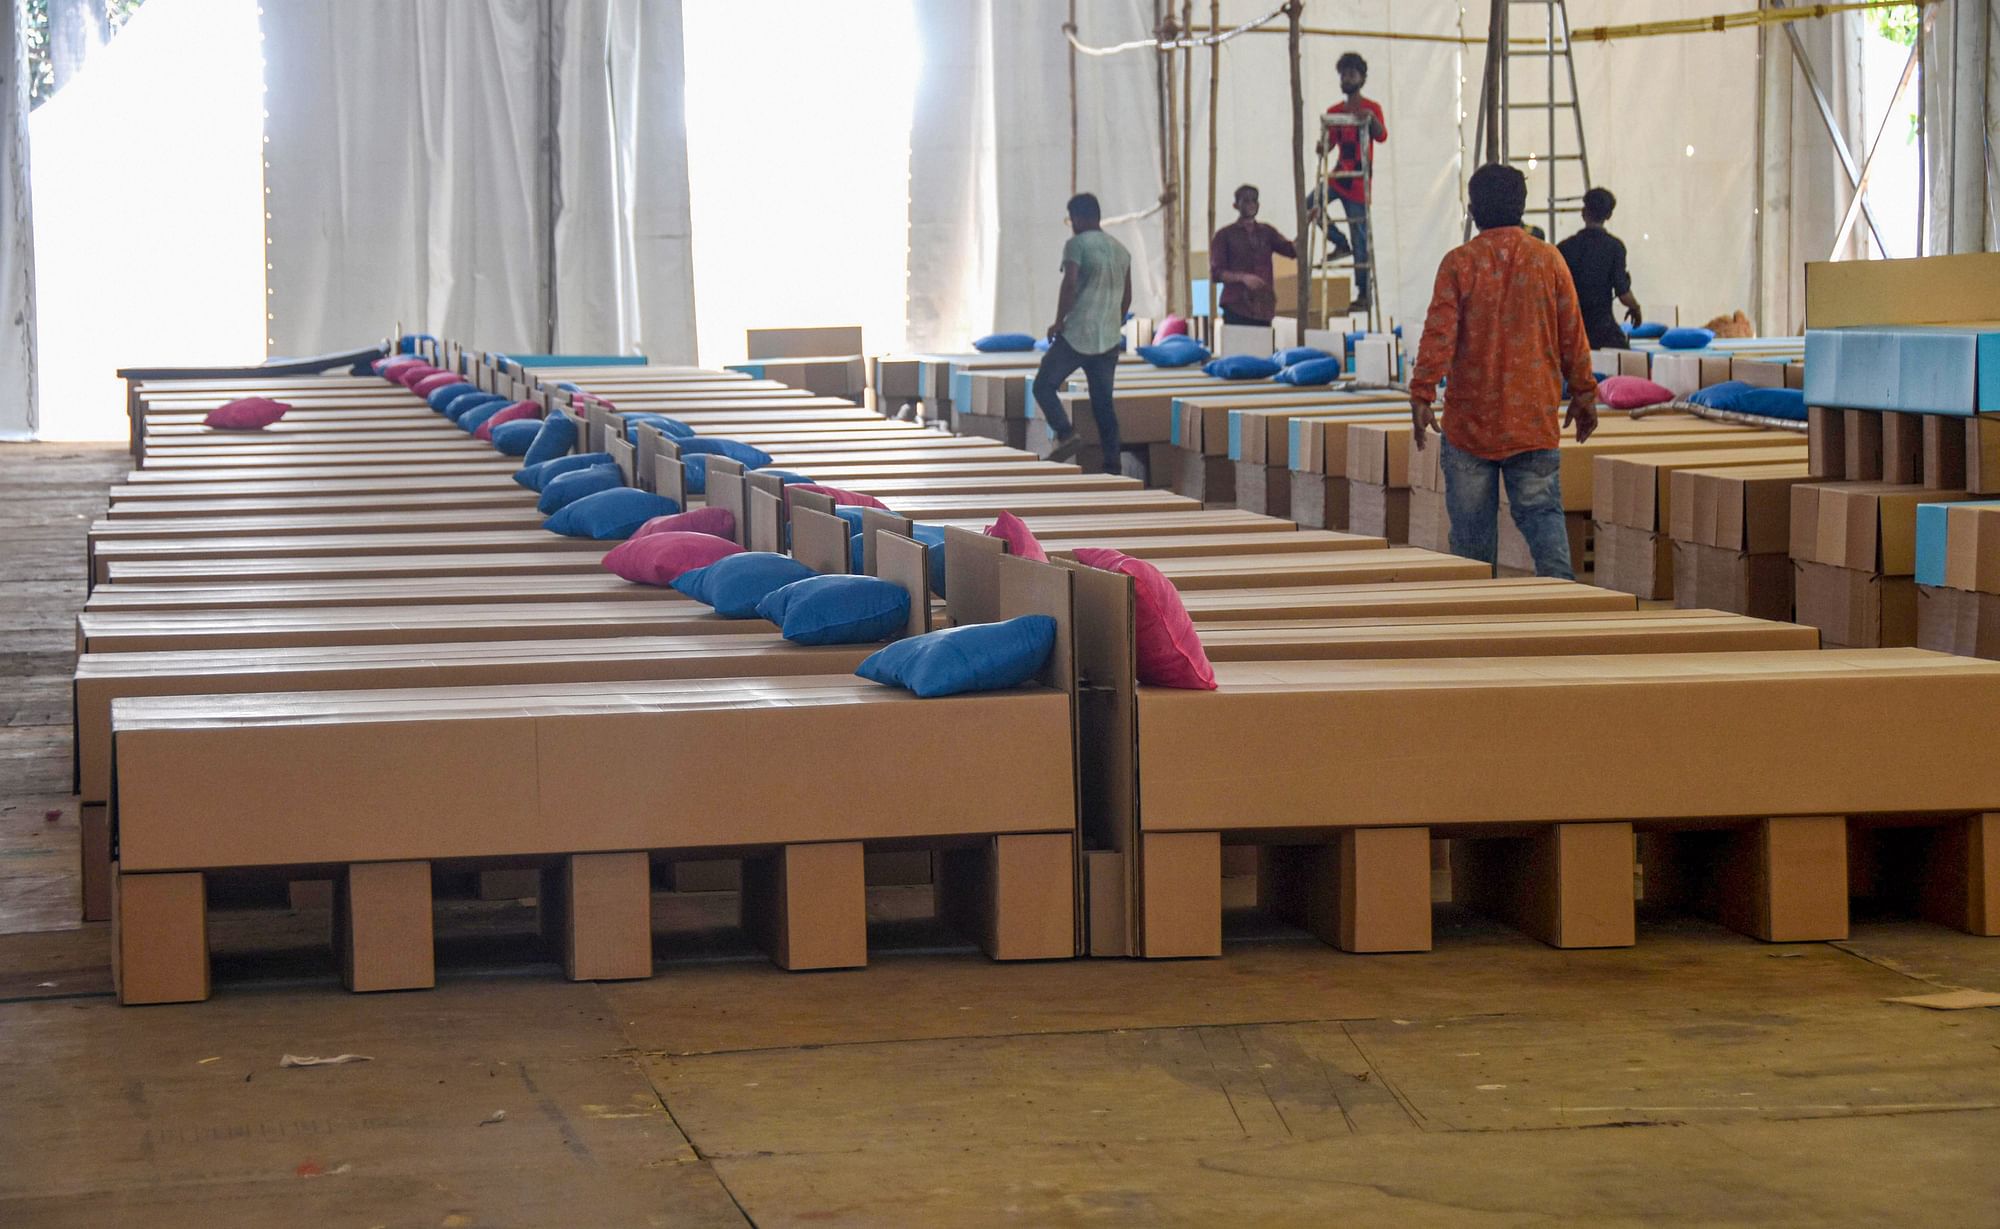 Paper-box beds are seen at an under construction quarantine facility for COVID-19 patients, at Dharavi in Mumbai on 3 May.